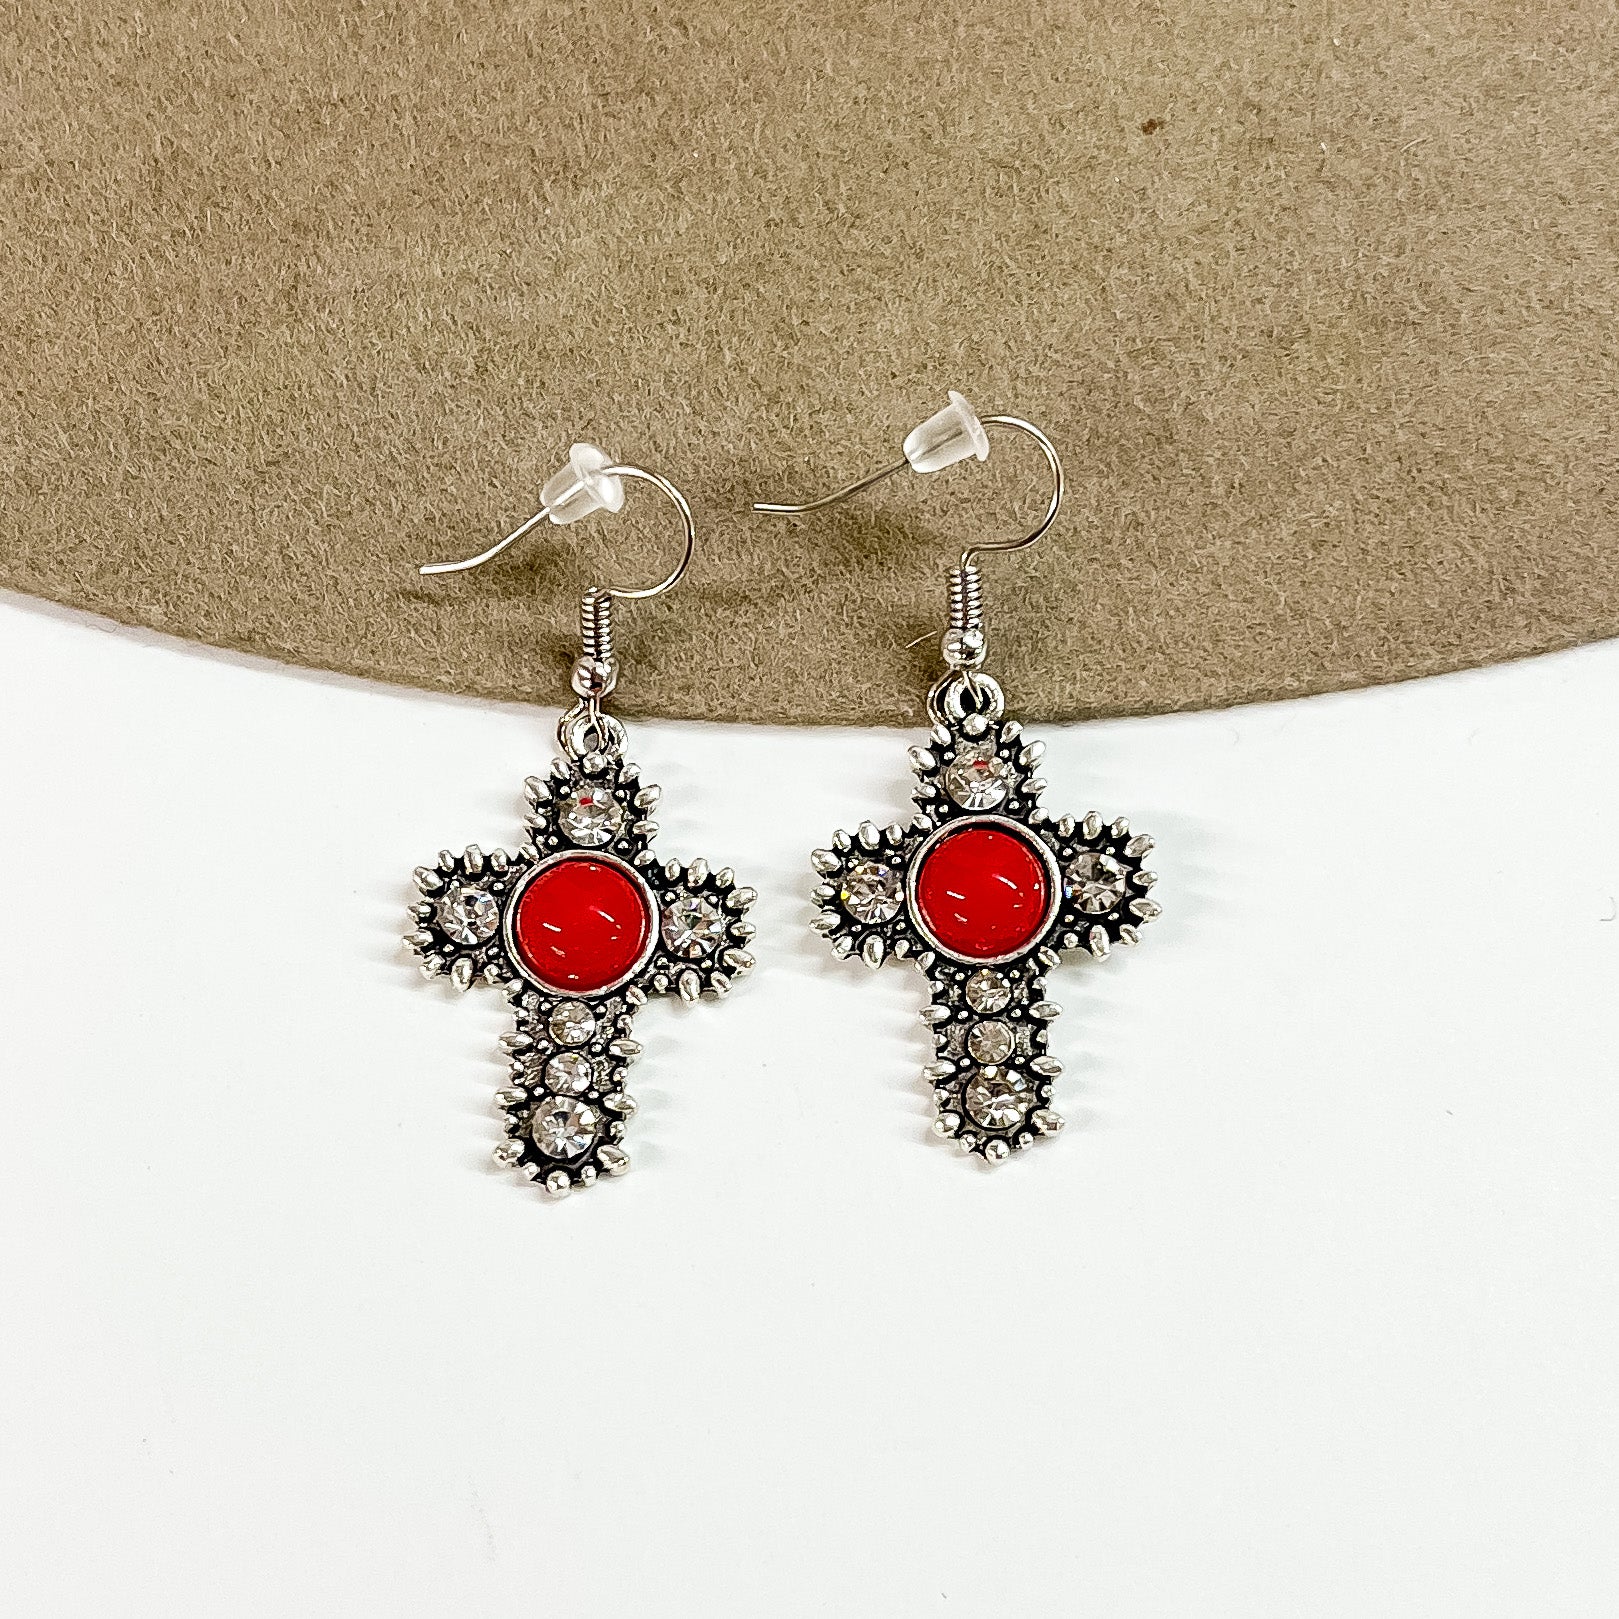 This is a pair of silver detailed cross earrings with small clear crystals  and a red circle stone in the center.  These earrings are laying on a brown felt hat brim and on a white background.